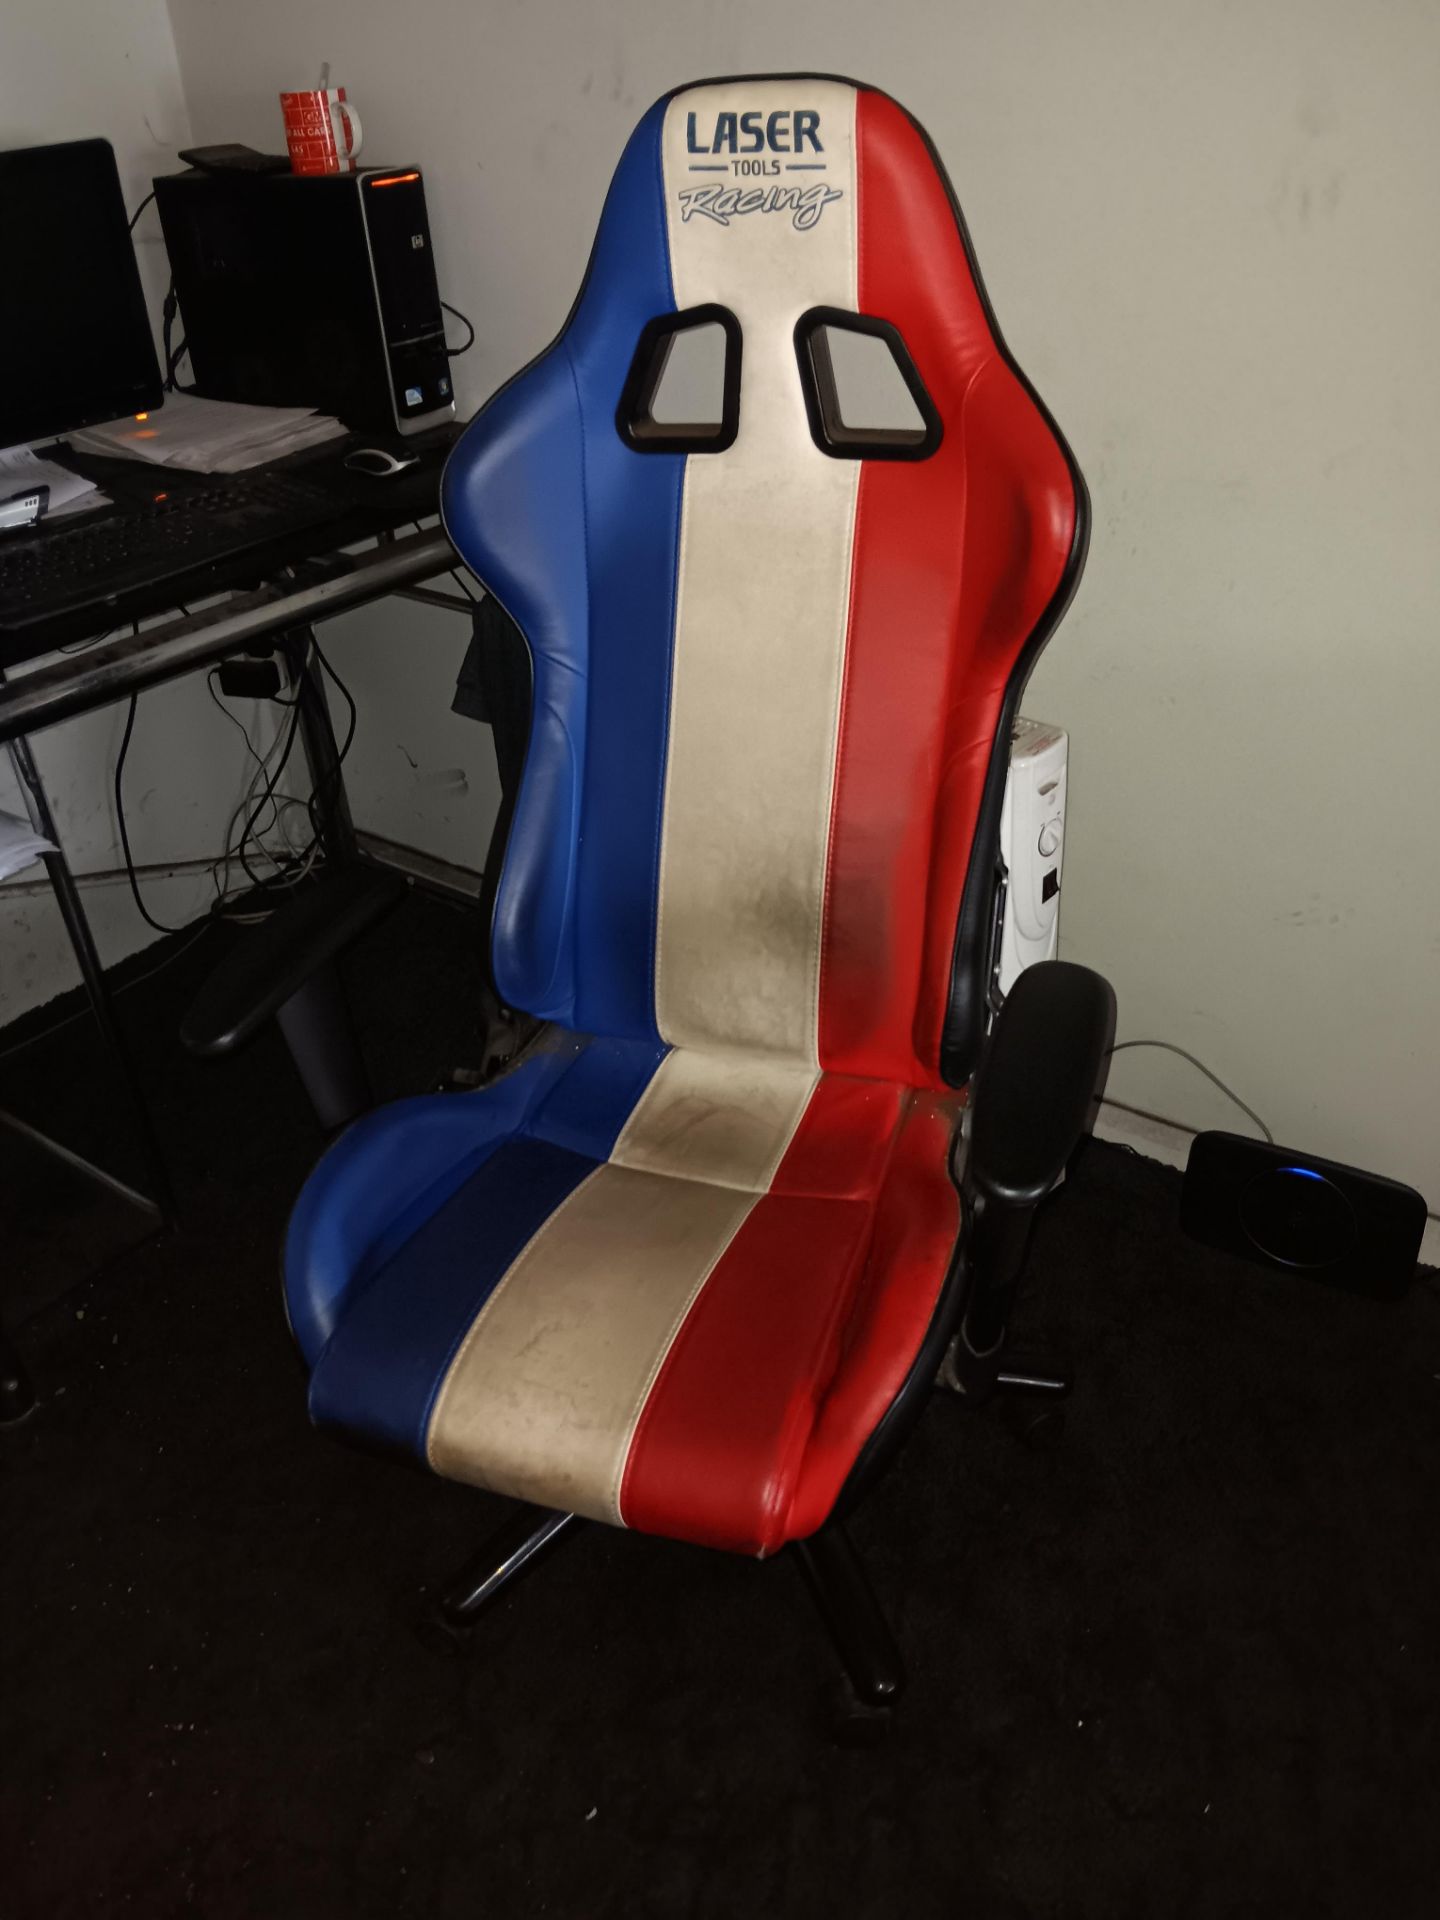 Laser Tools racing chair (located on 1st floor)